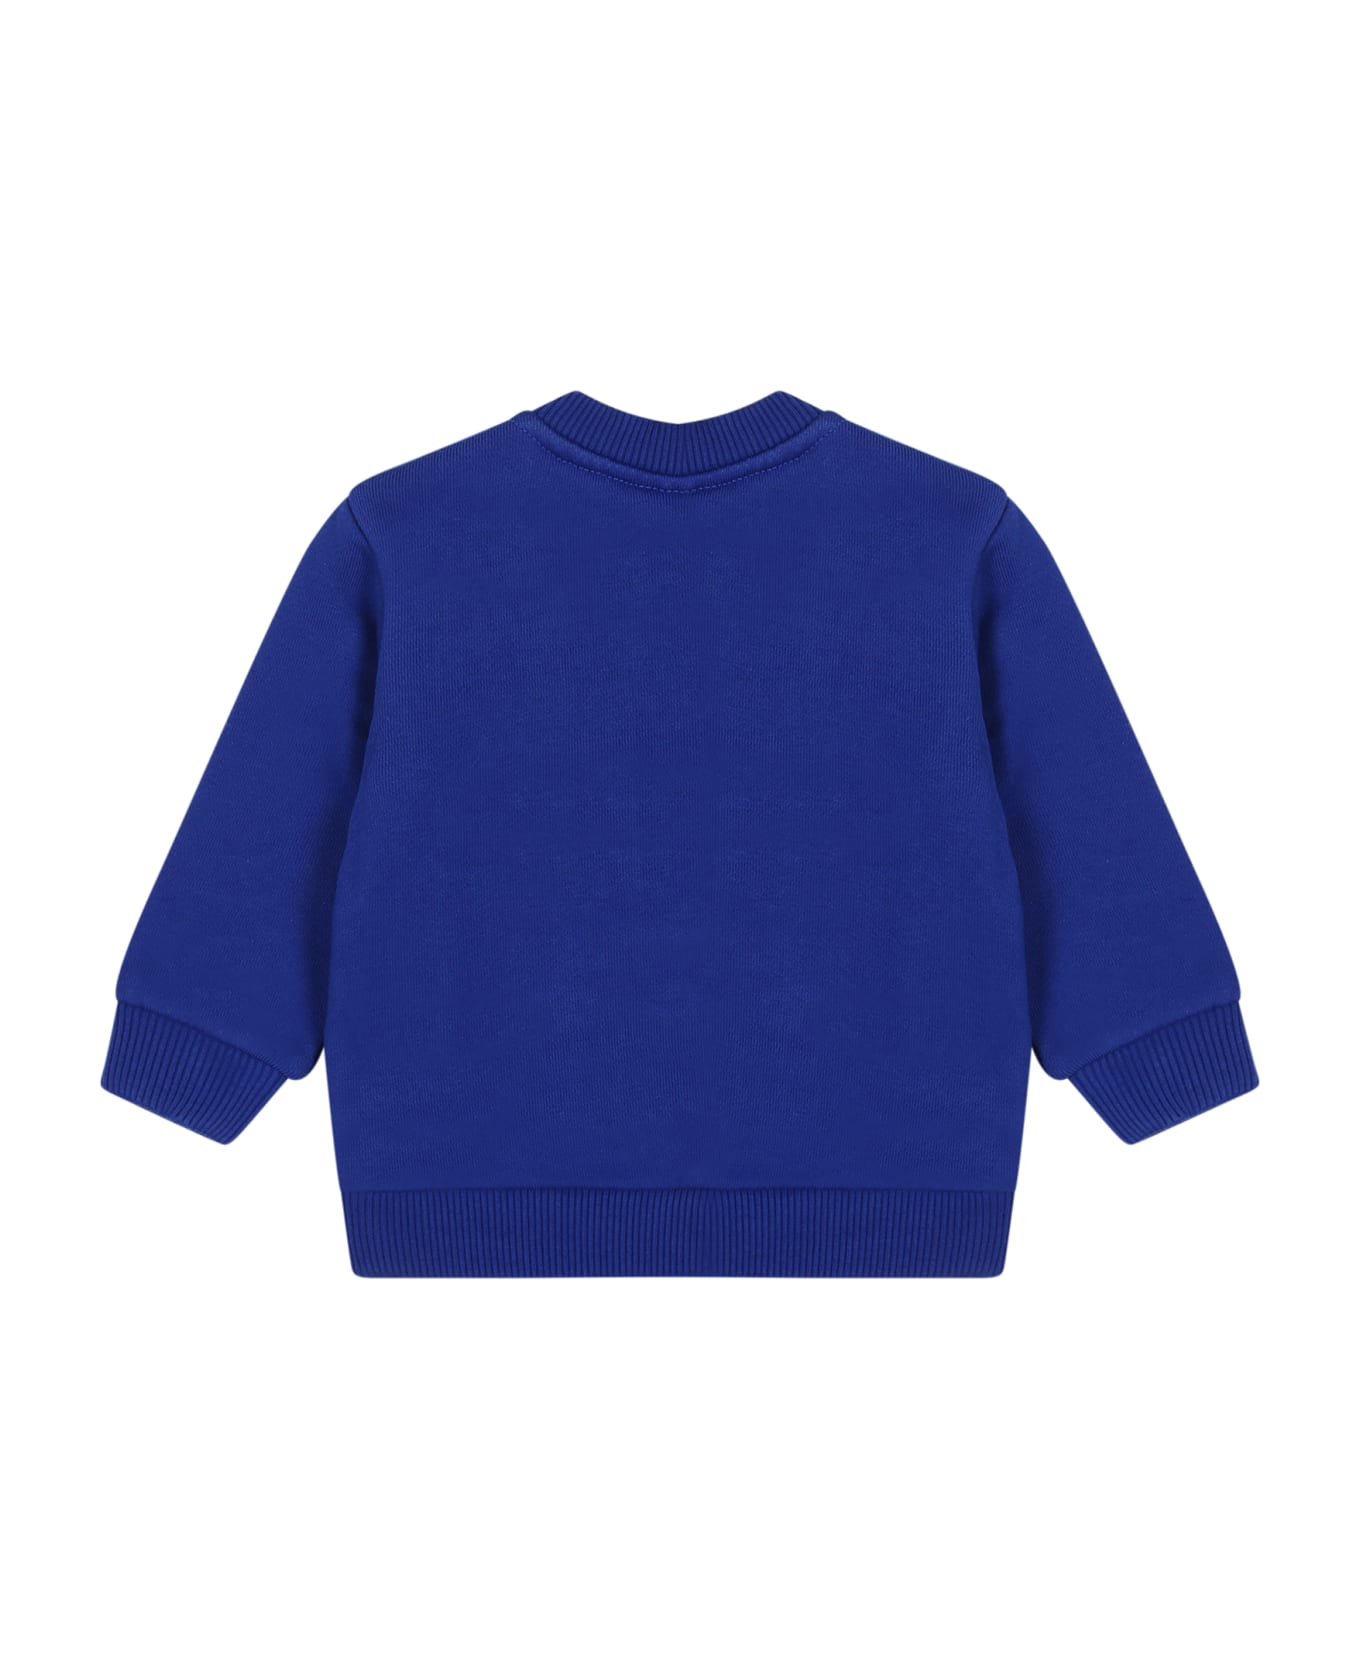 Off-White Blue Sweatshirt For Baby Boy With Mascot Logo Print - Blue